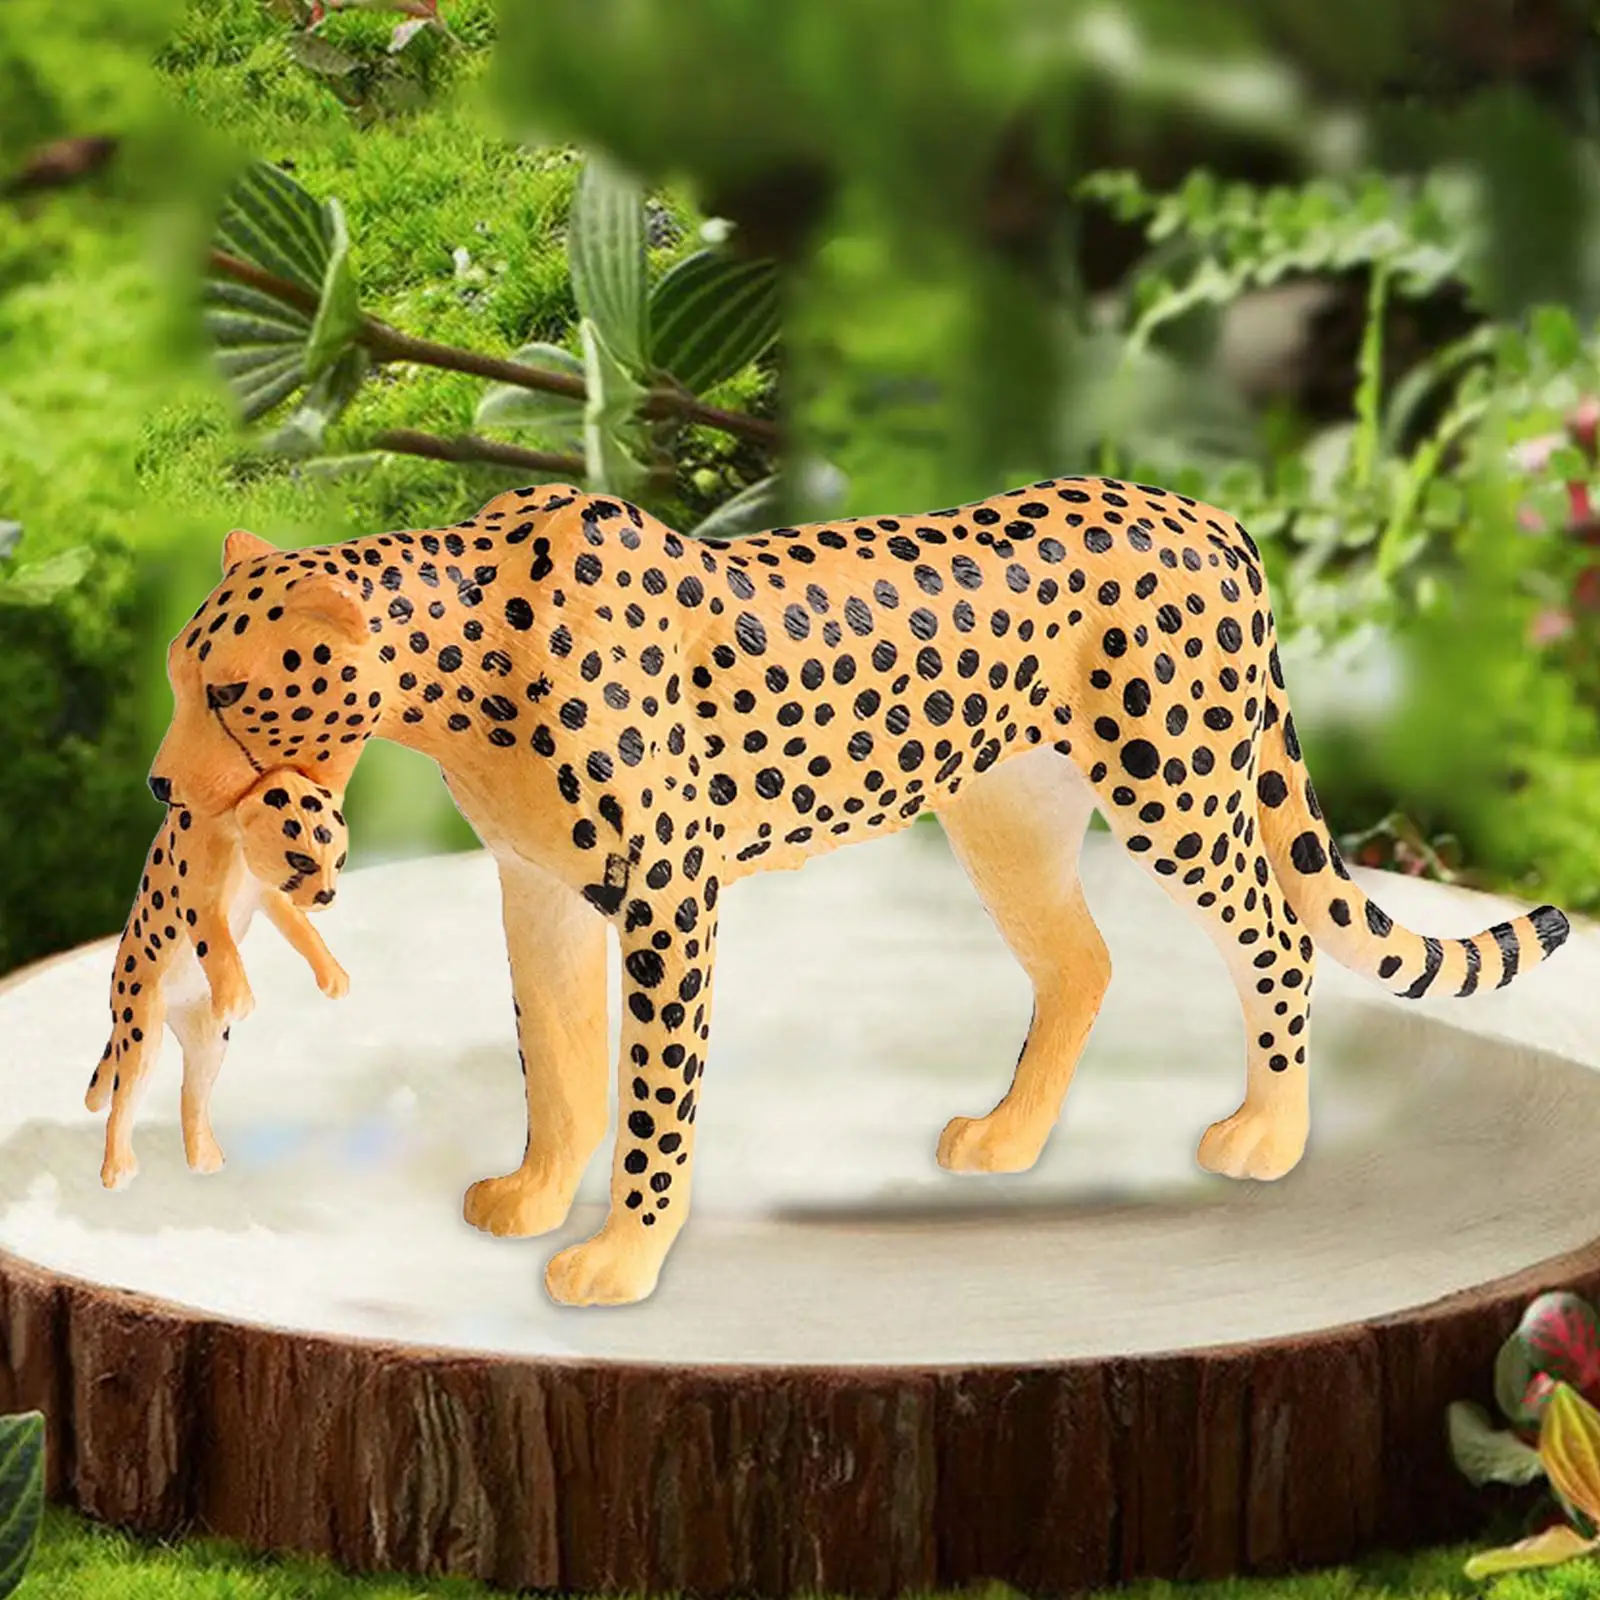 Leopard Toy Figurine Preschool Leopard Figures for Cake Topper Holiday Gift